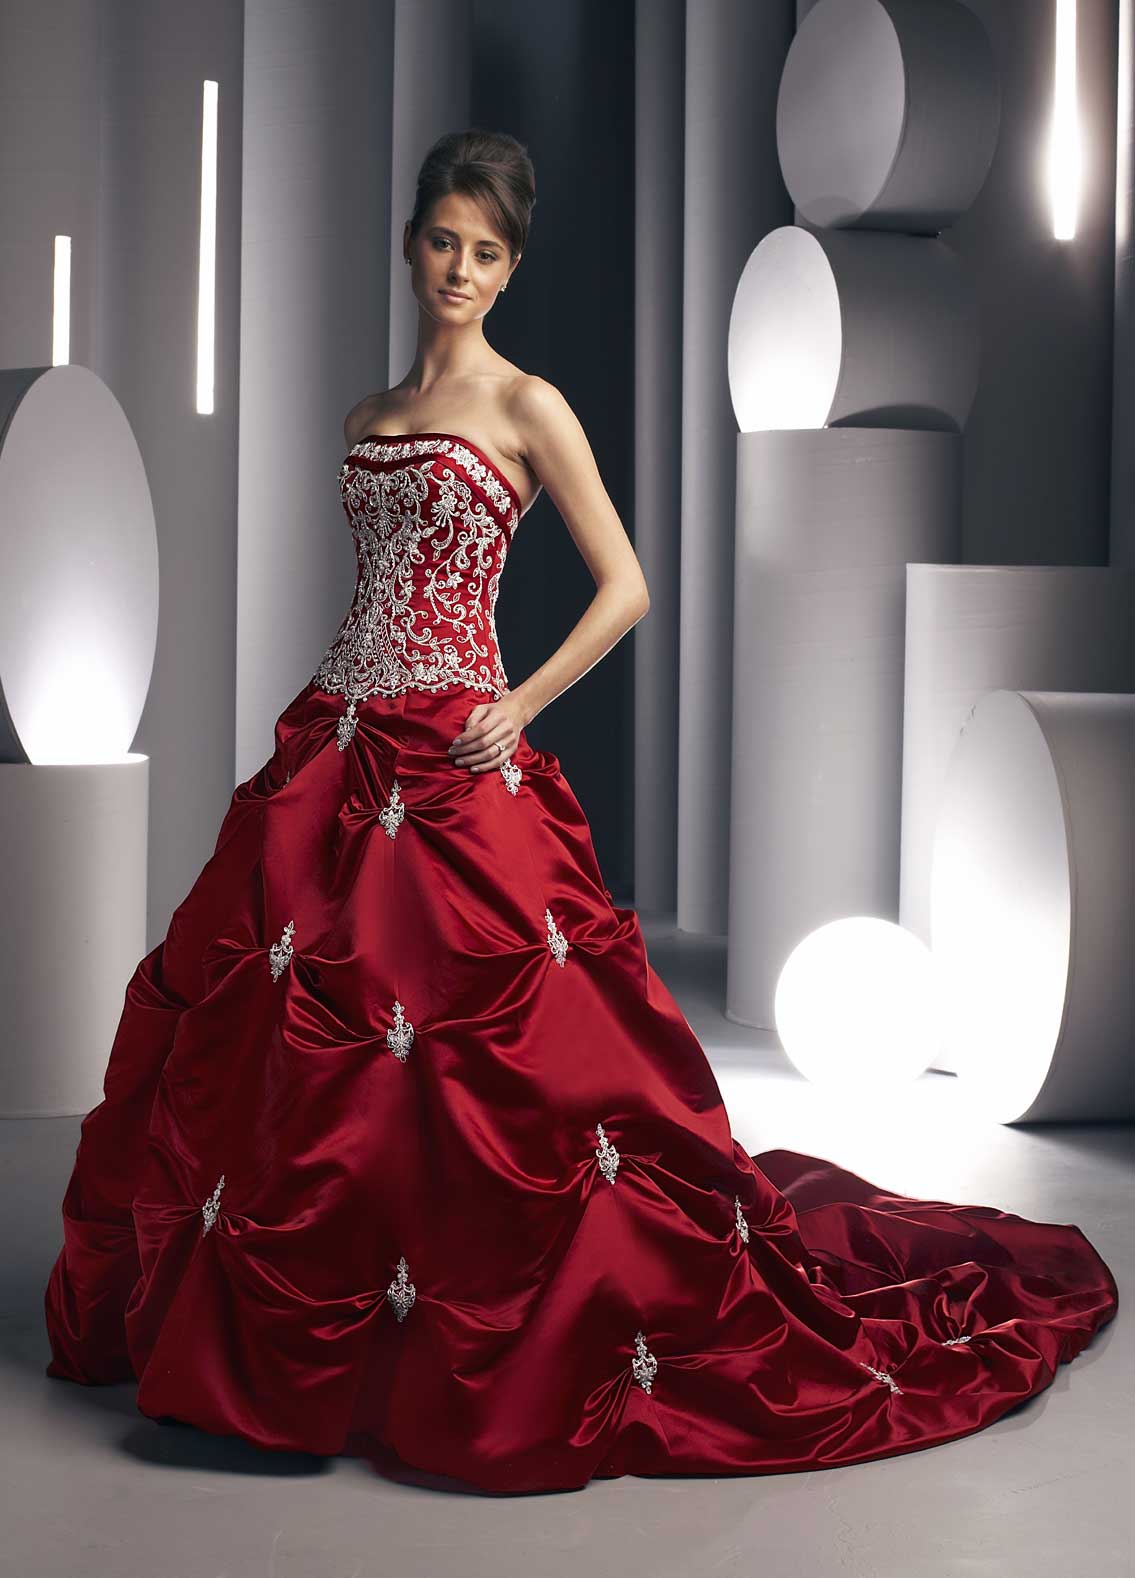 Best Red Dress To Wedding in the world Check it out now | weddinggarden2